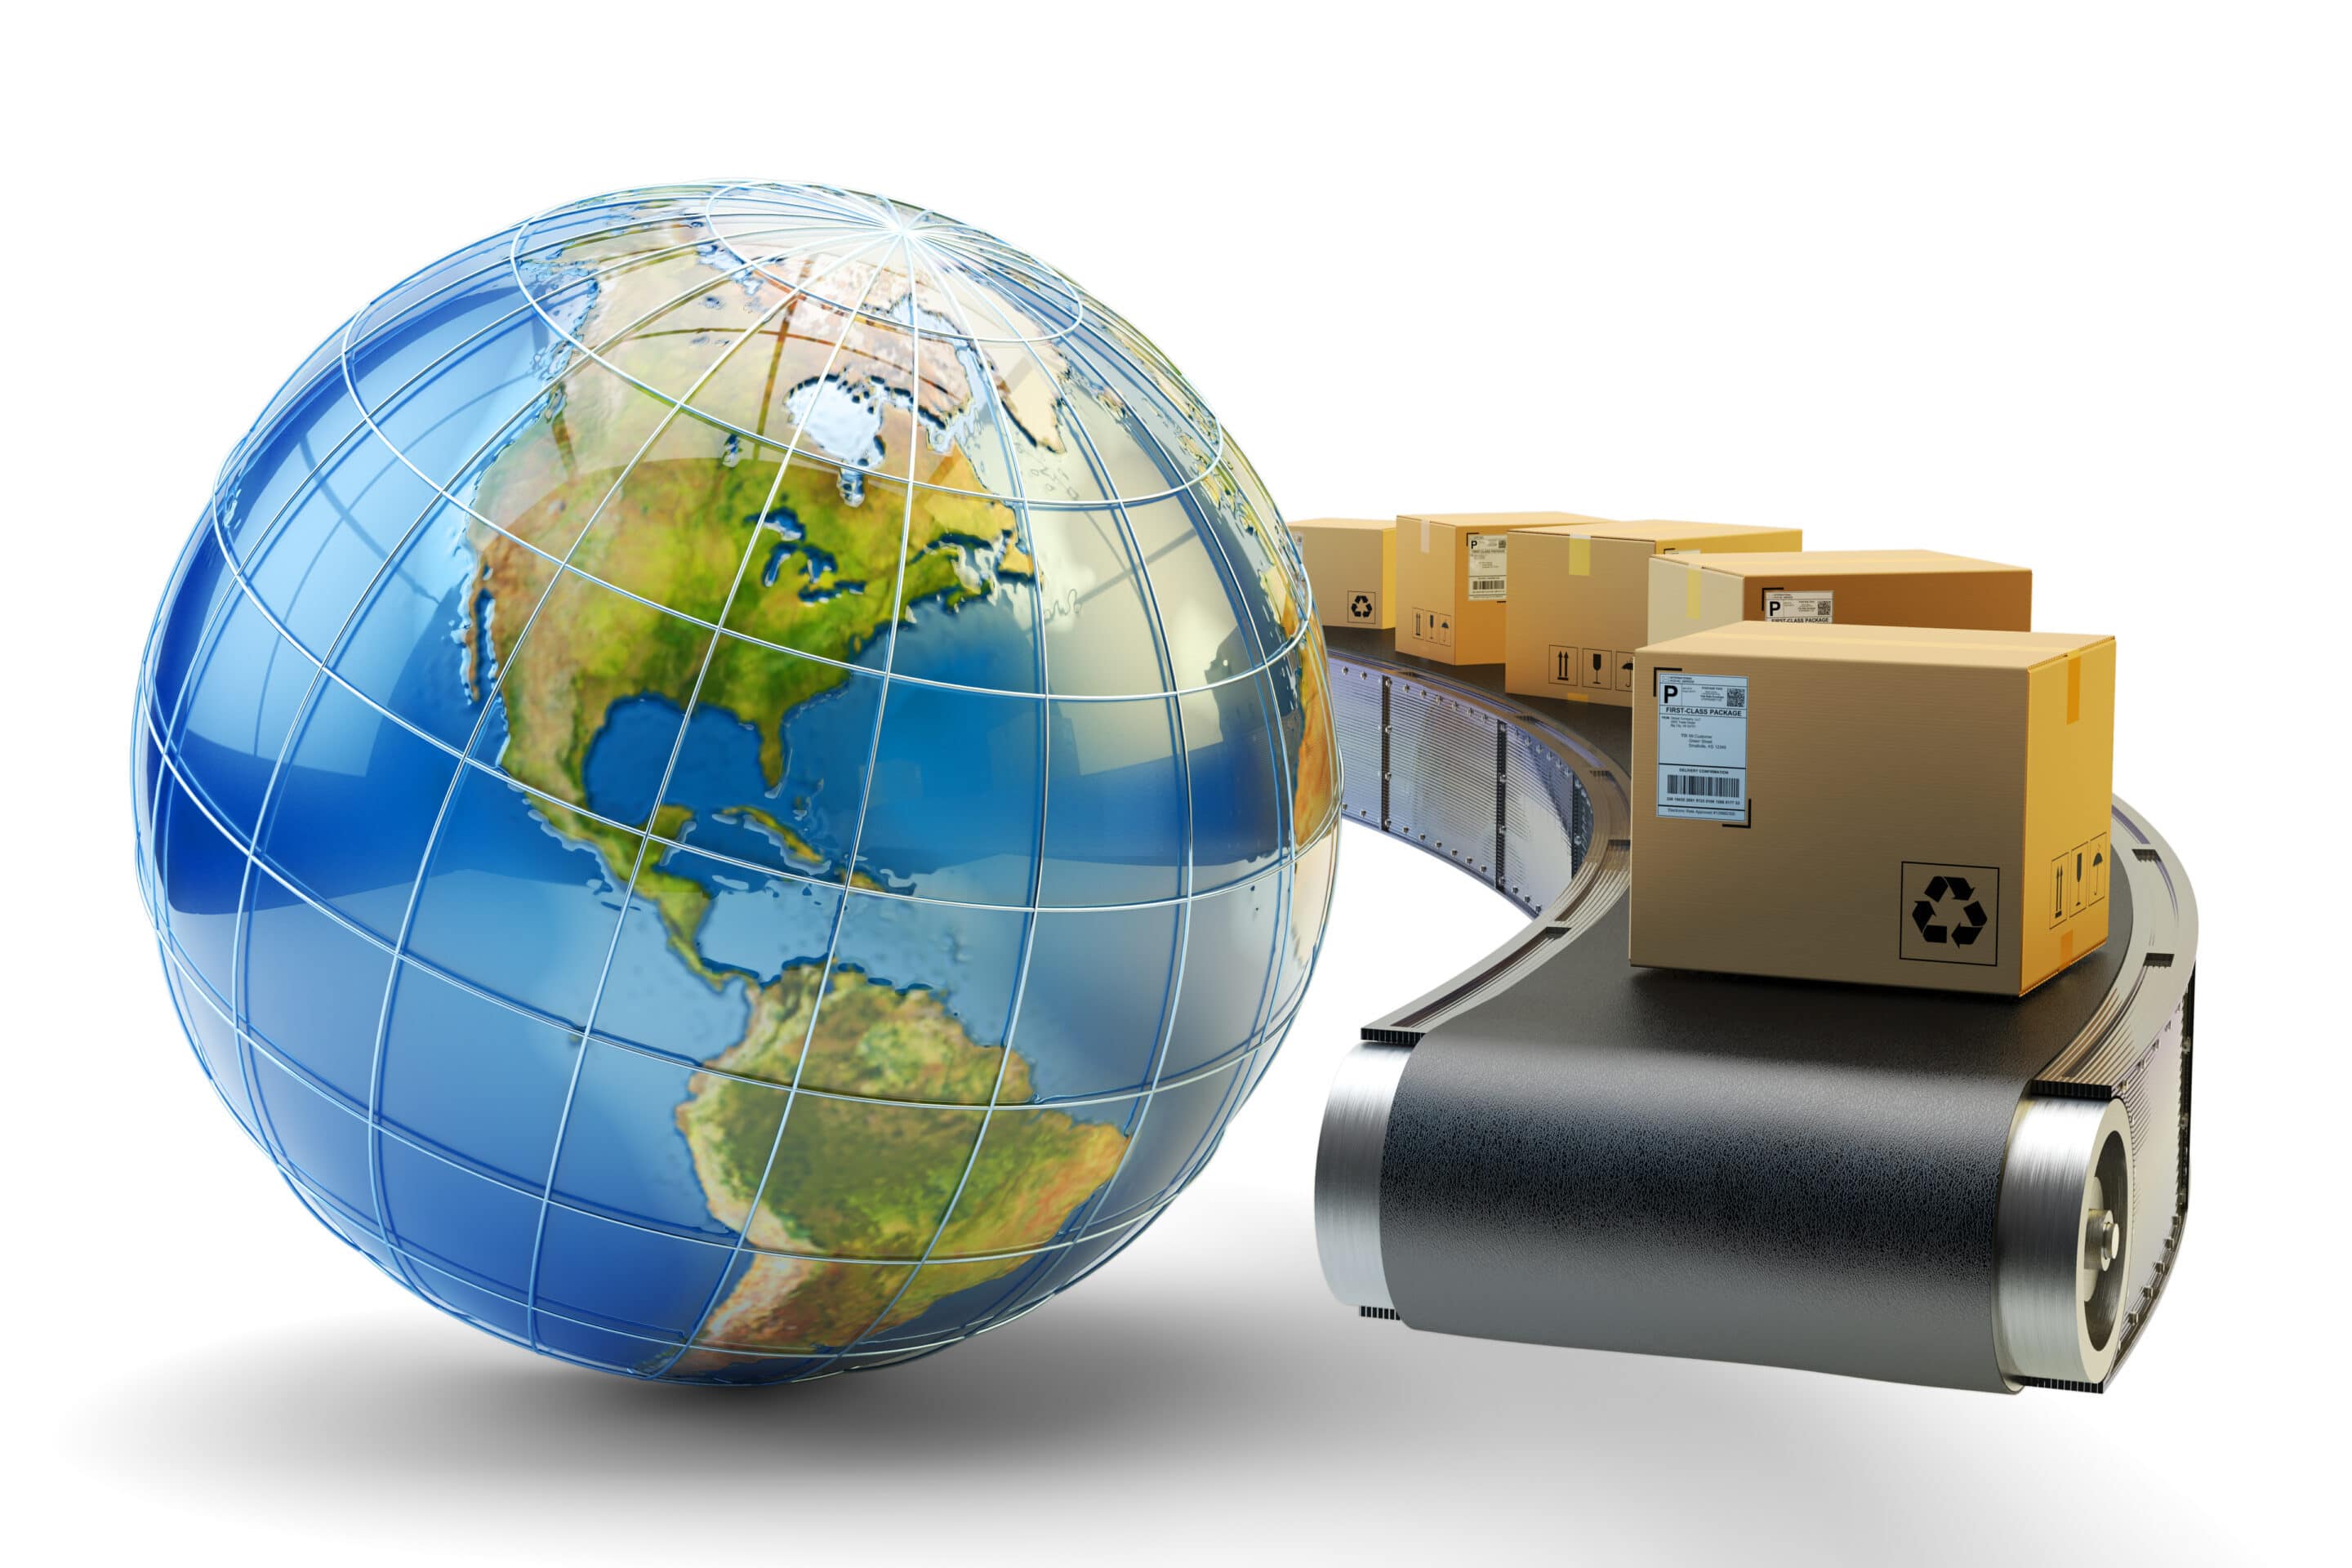 international-package-delivery-and-parcels-shipping-concept-2